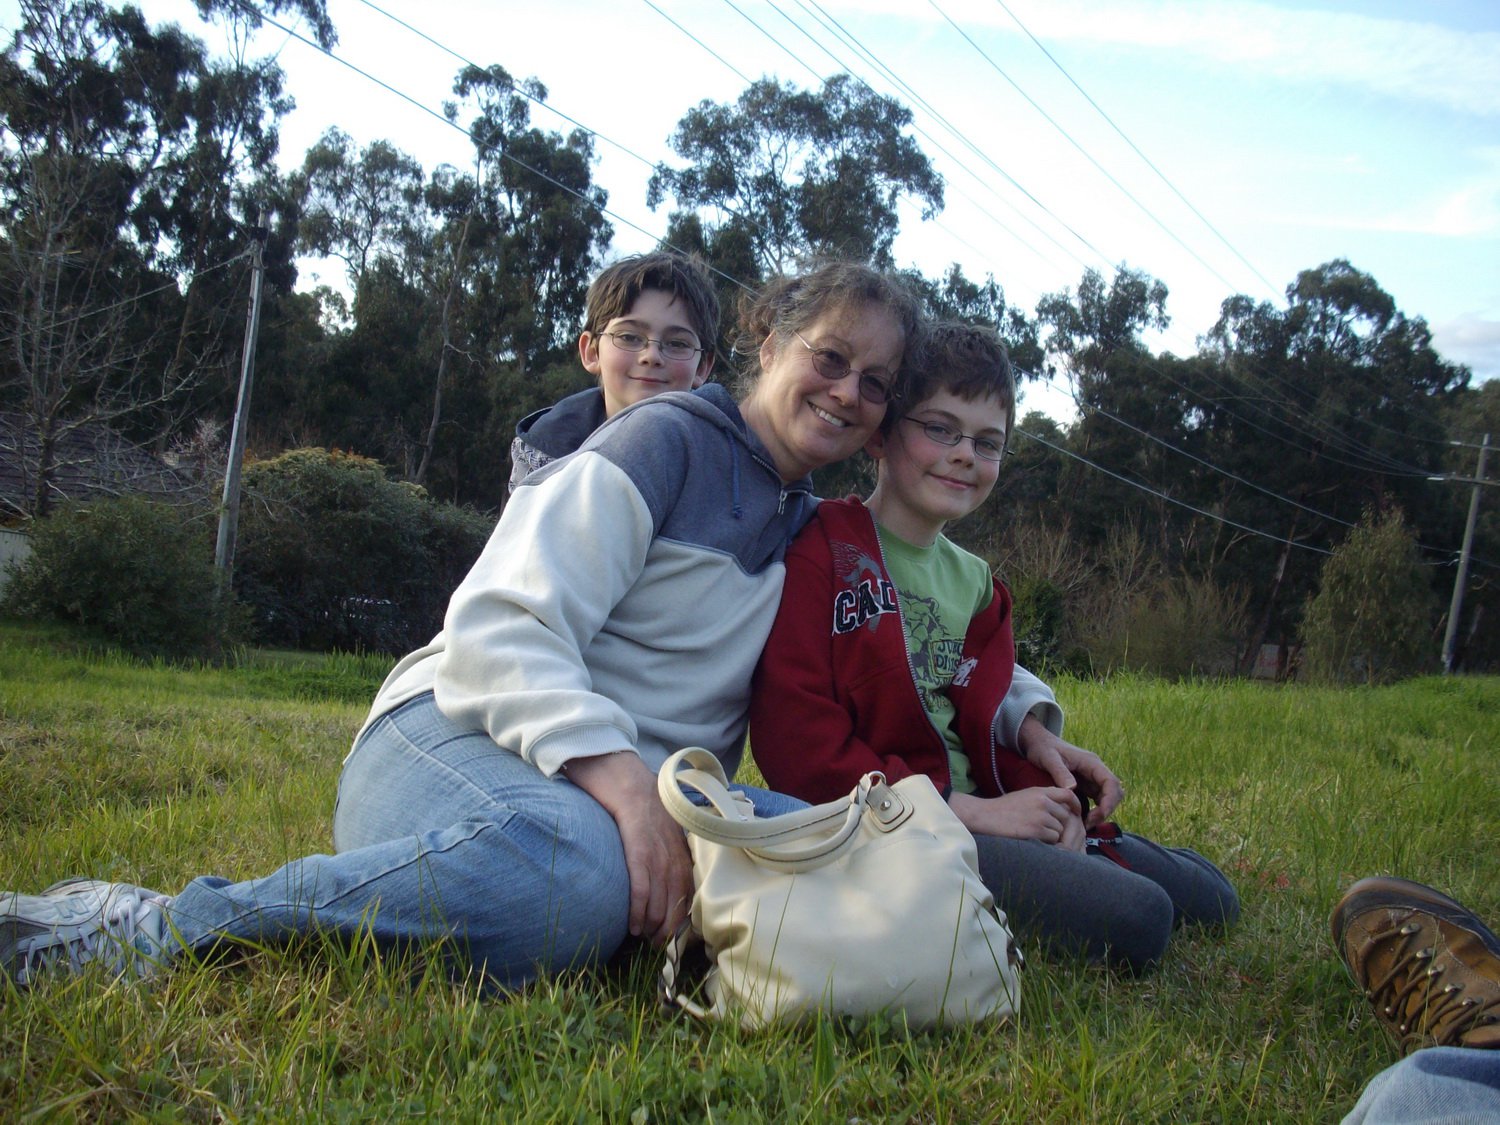 Kyle, Karen and Connor waiting for the steam train to pass. Eltham, August 2011.